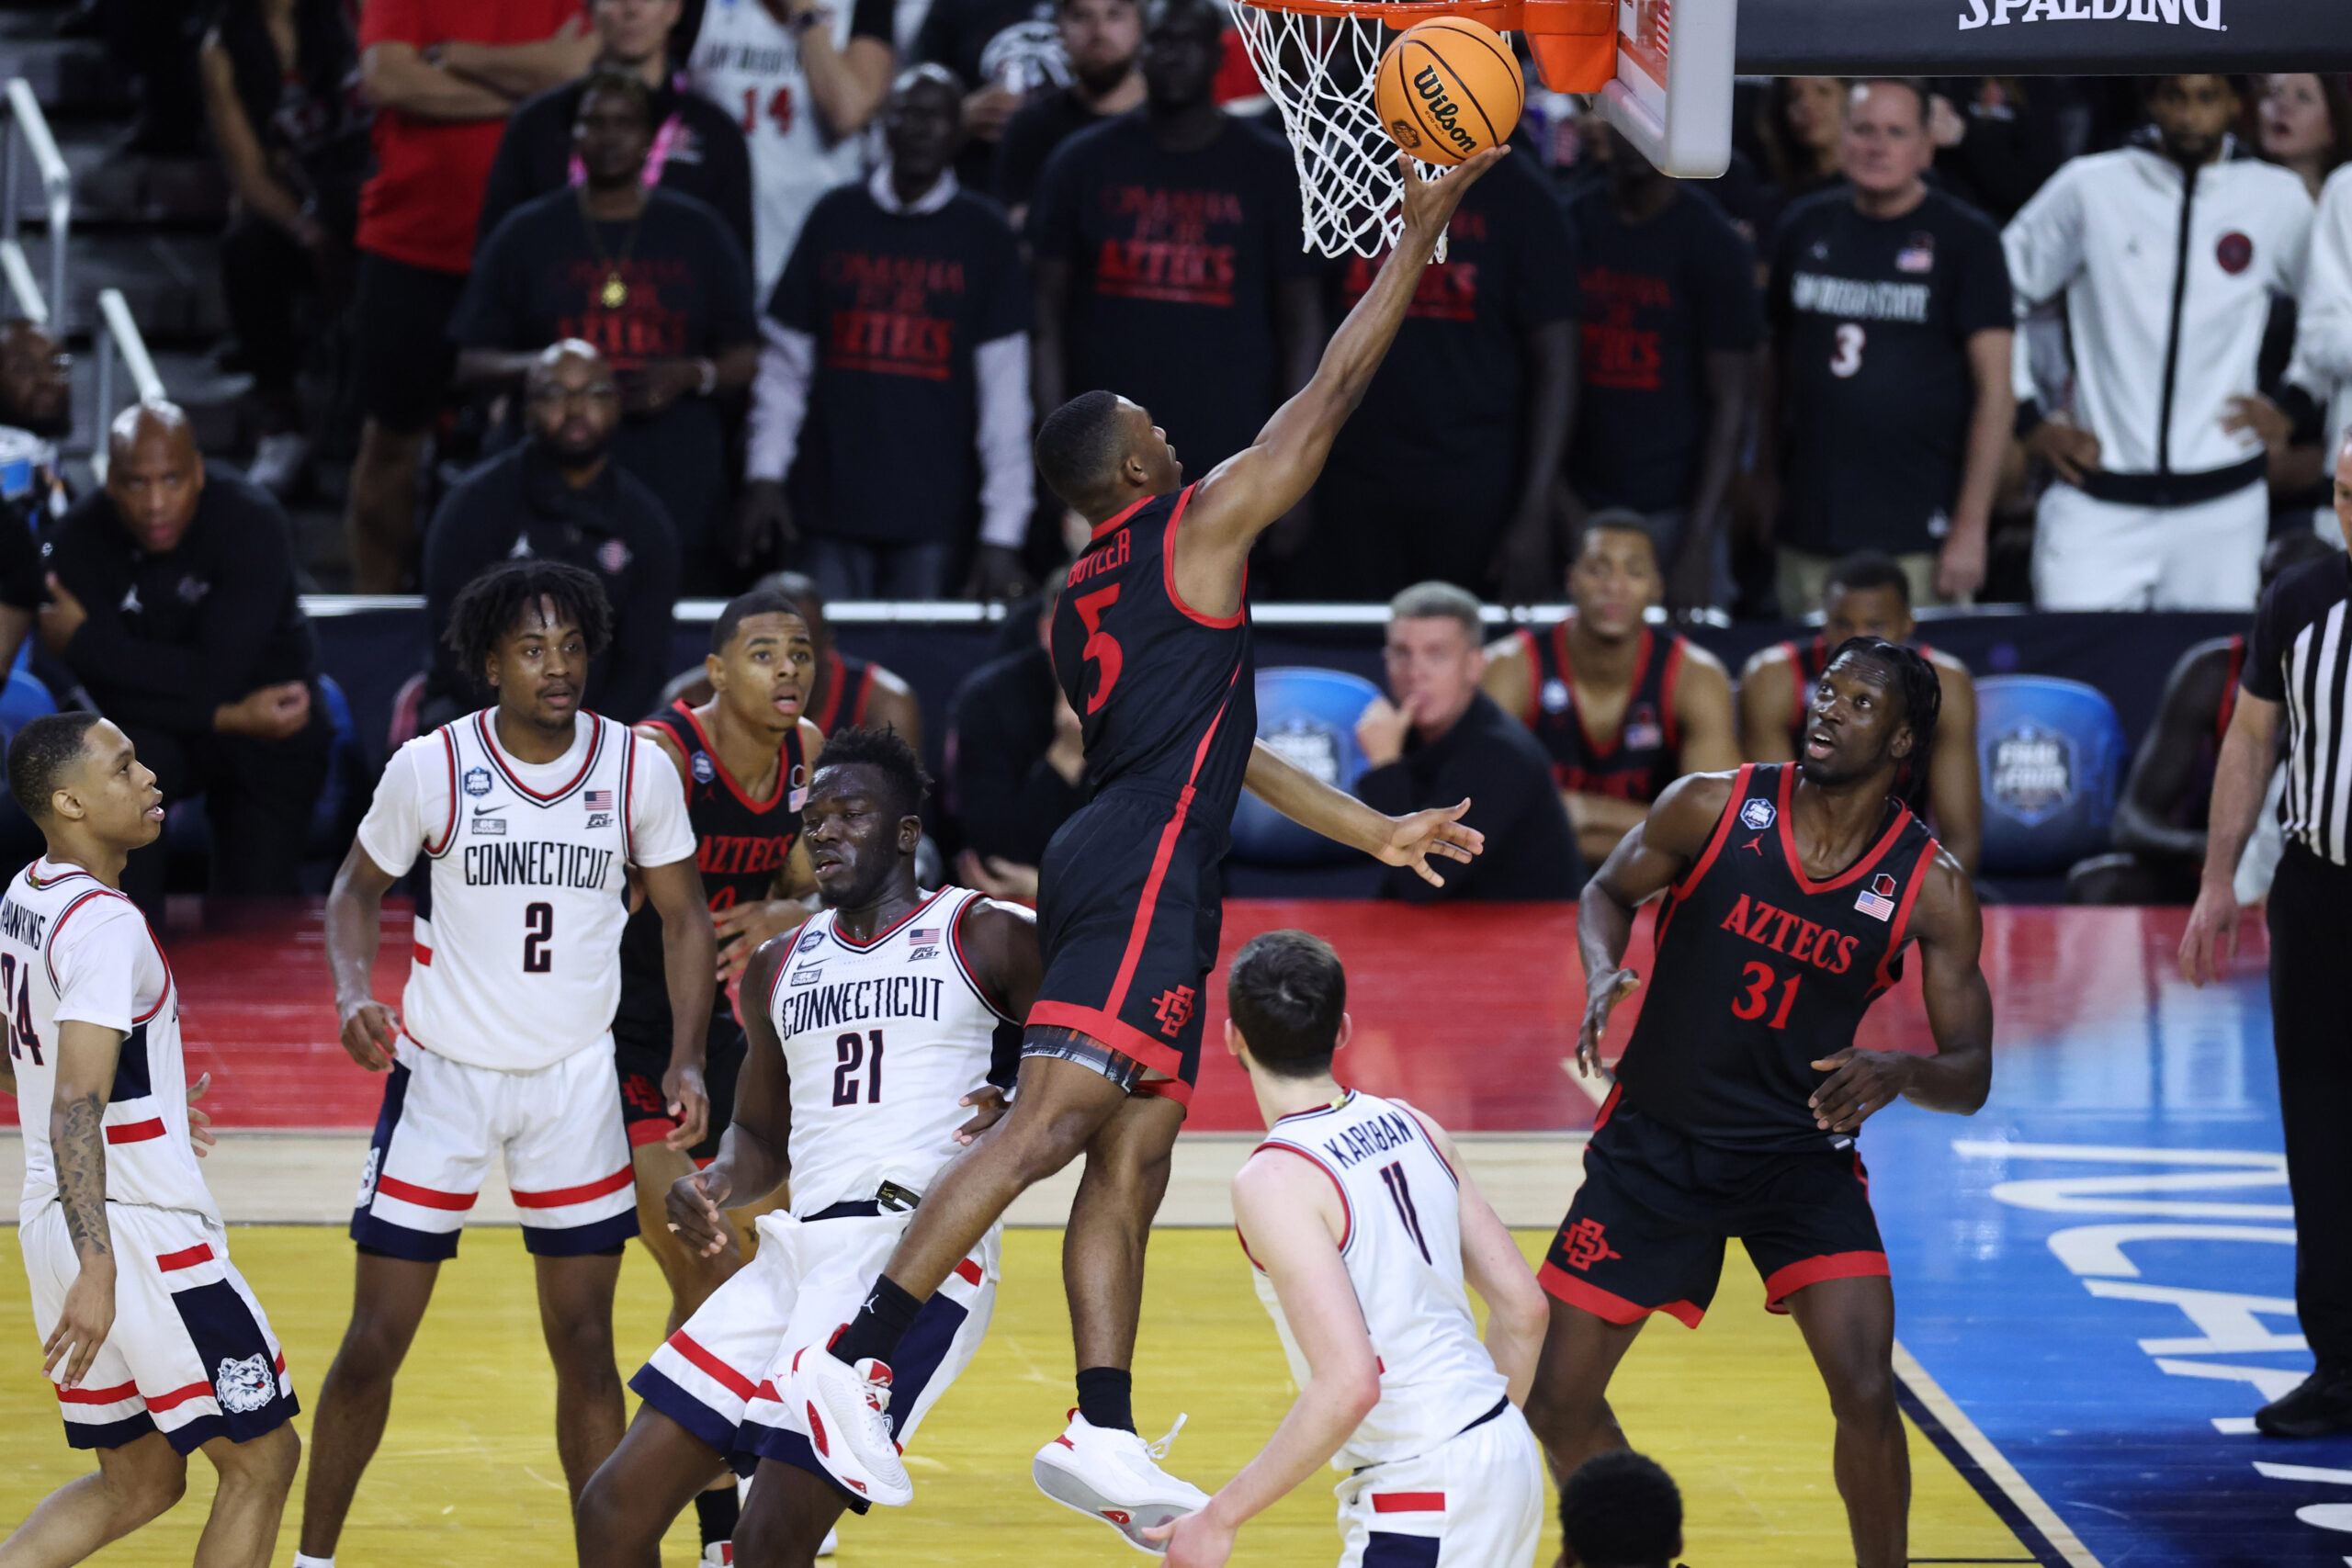 San Diego State puts up a fight in national title game vs UConn